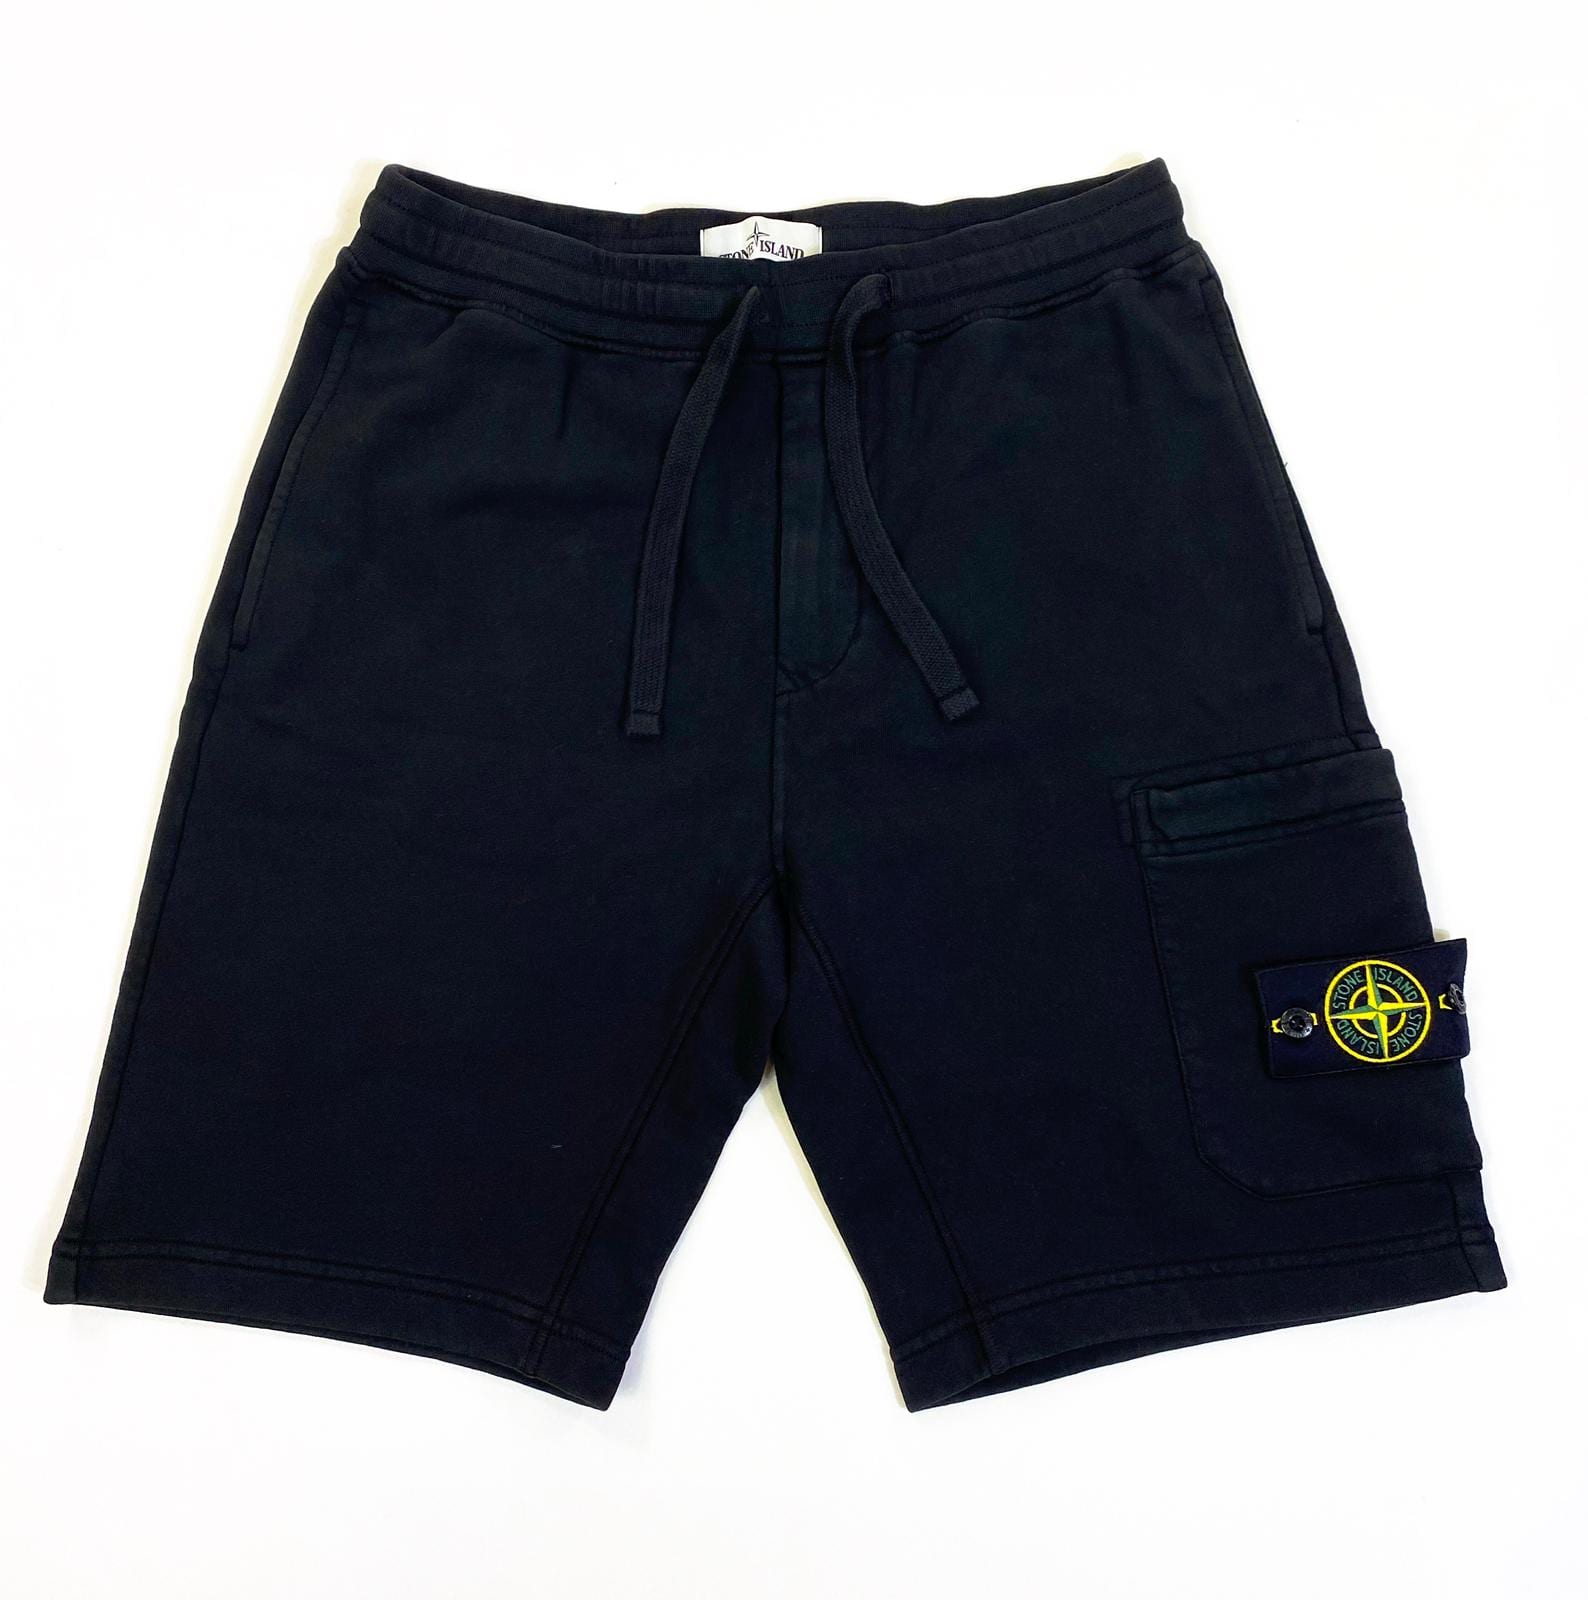 Stone Island 63560 T.CO+OLD Fleece Shorts Teal Black - Esquire Clothing